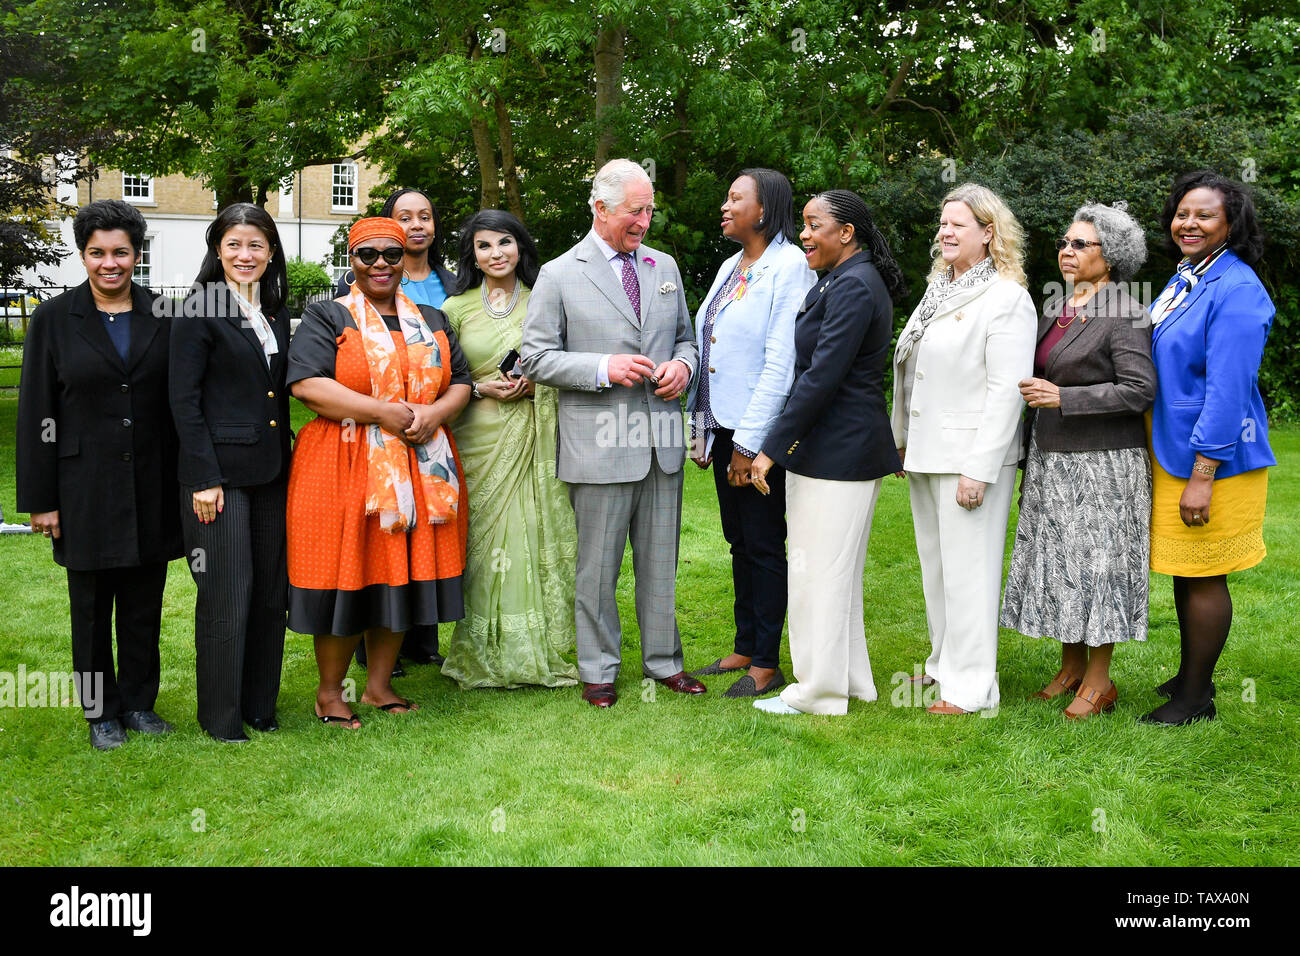 The Prince of Wales (centre) stands with Commonwealth representatives during his visit to the Duchy of Cornwall office in Poundbury in Dorchester, Dorset, to view an exhibition, including one of his own watercolours, as part of the Open for Art project. Stock Photo